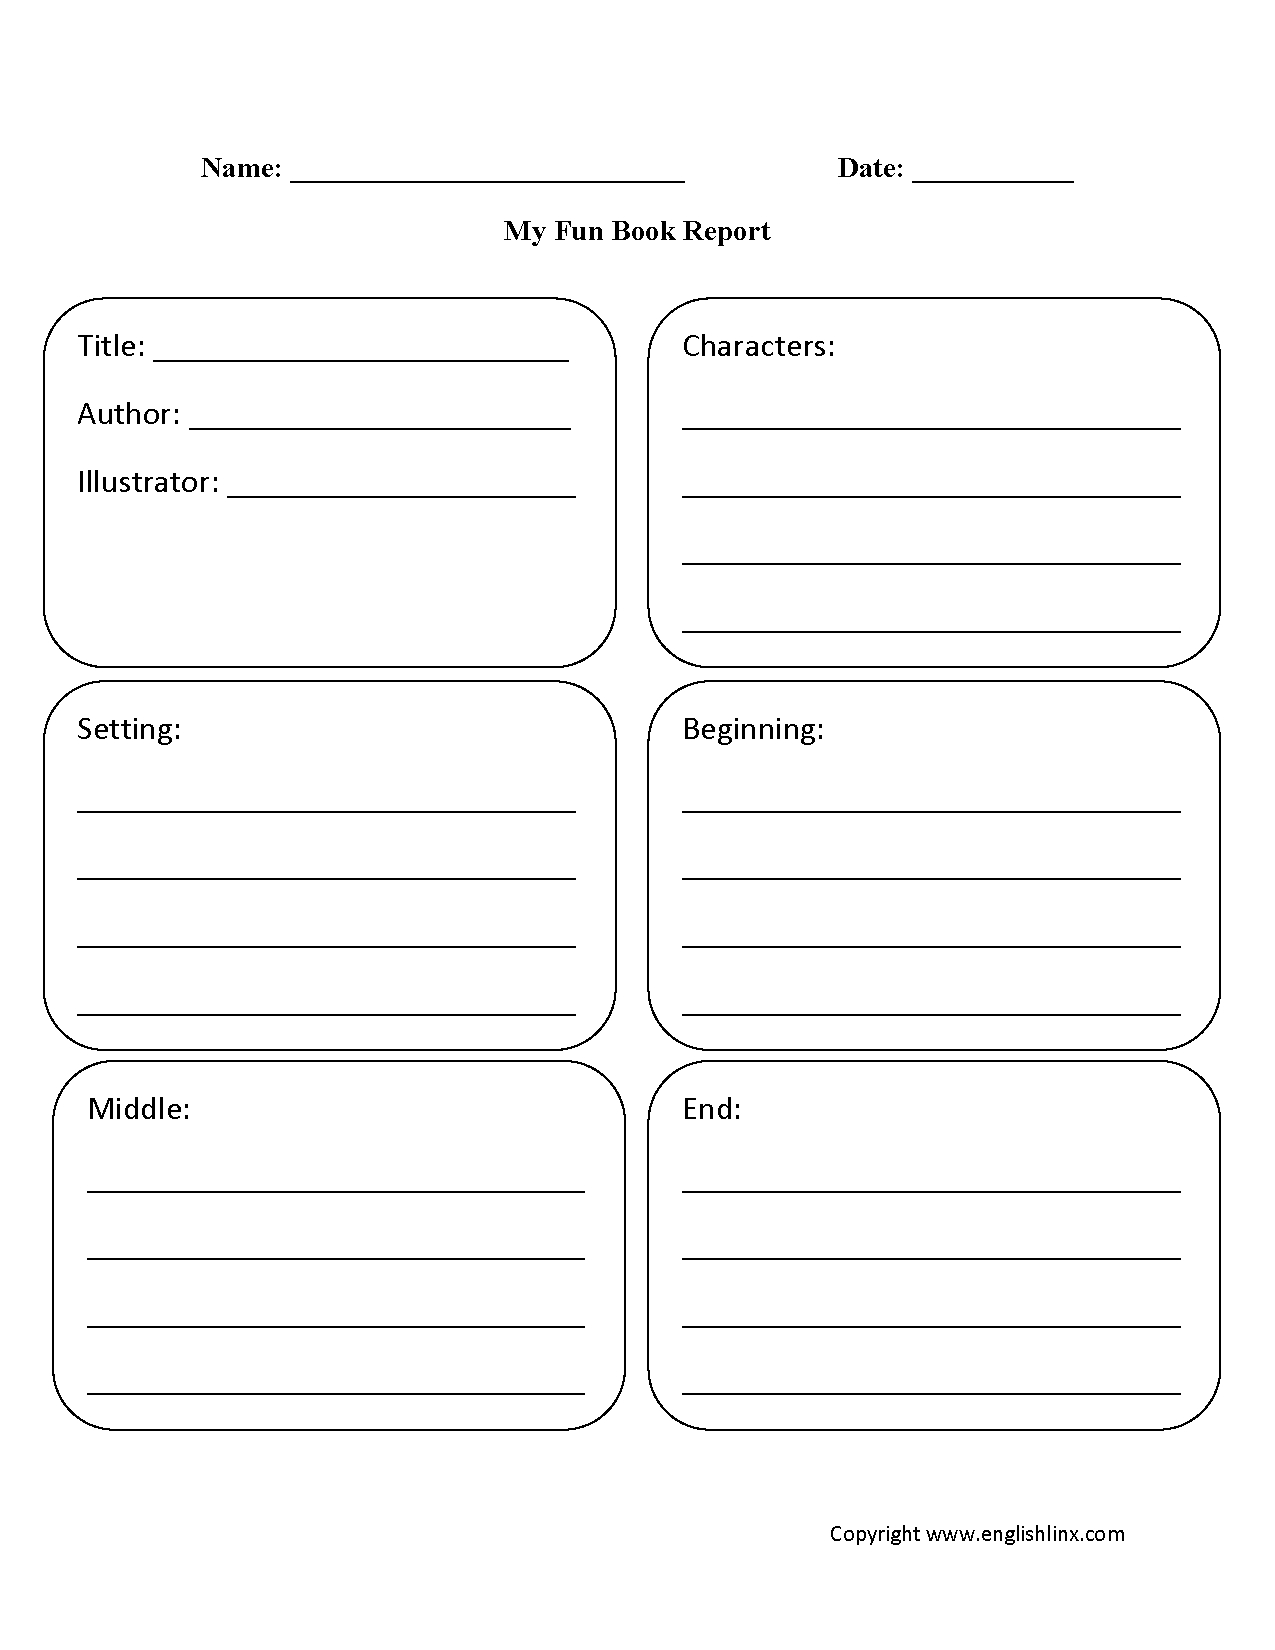 Englishlinx | Book Report Worksheets - Book Report Template Free Printable